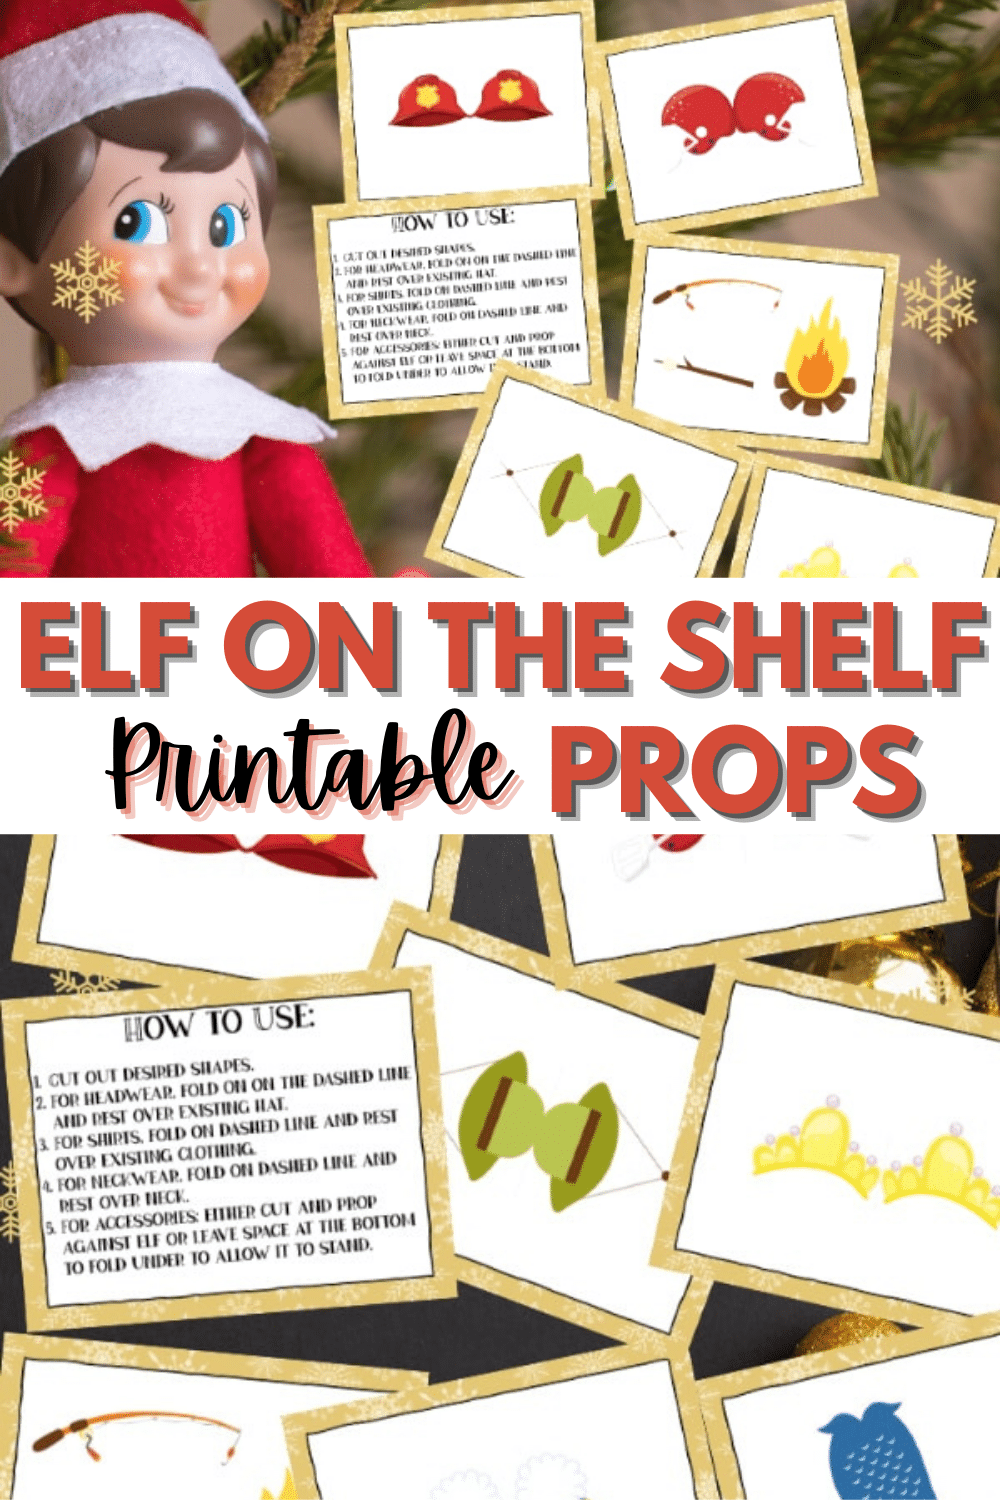 These Elf on the Shelf Printable Props will make life easier for parents and kids will love the new costumes and accessories their elf has on. #elfontheshelf #christmas #printables via @wondermomwannab